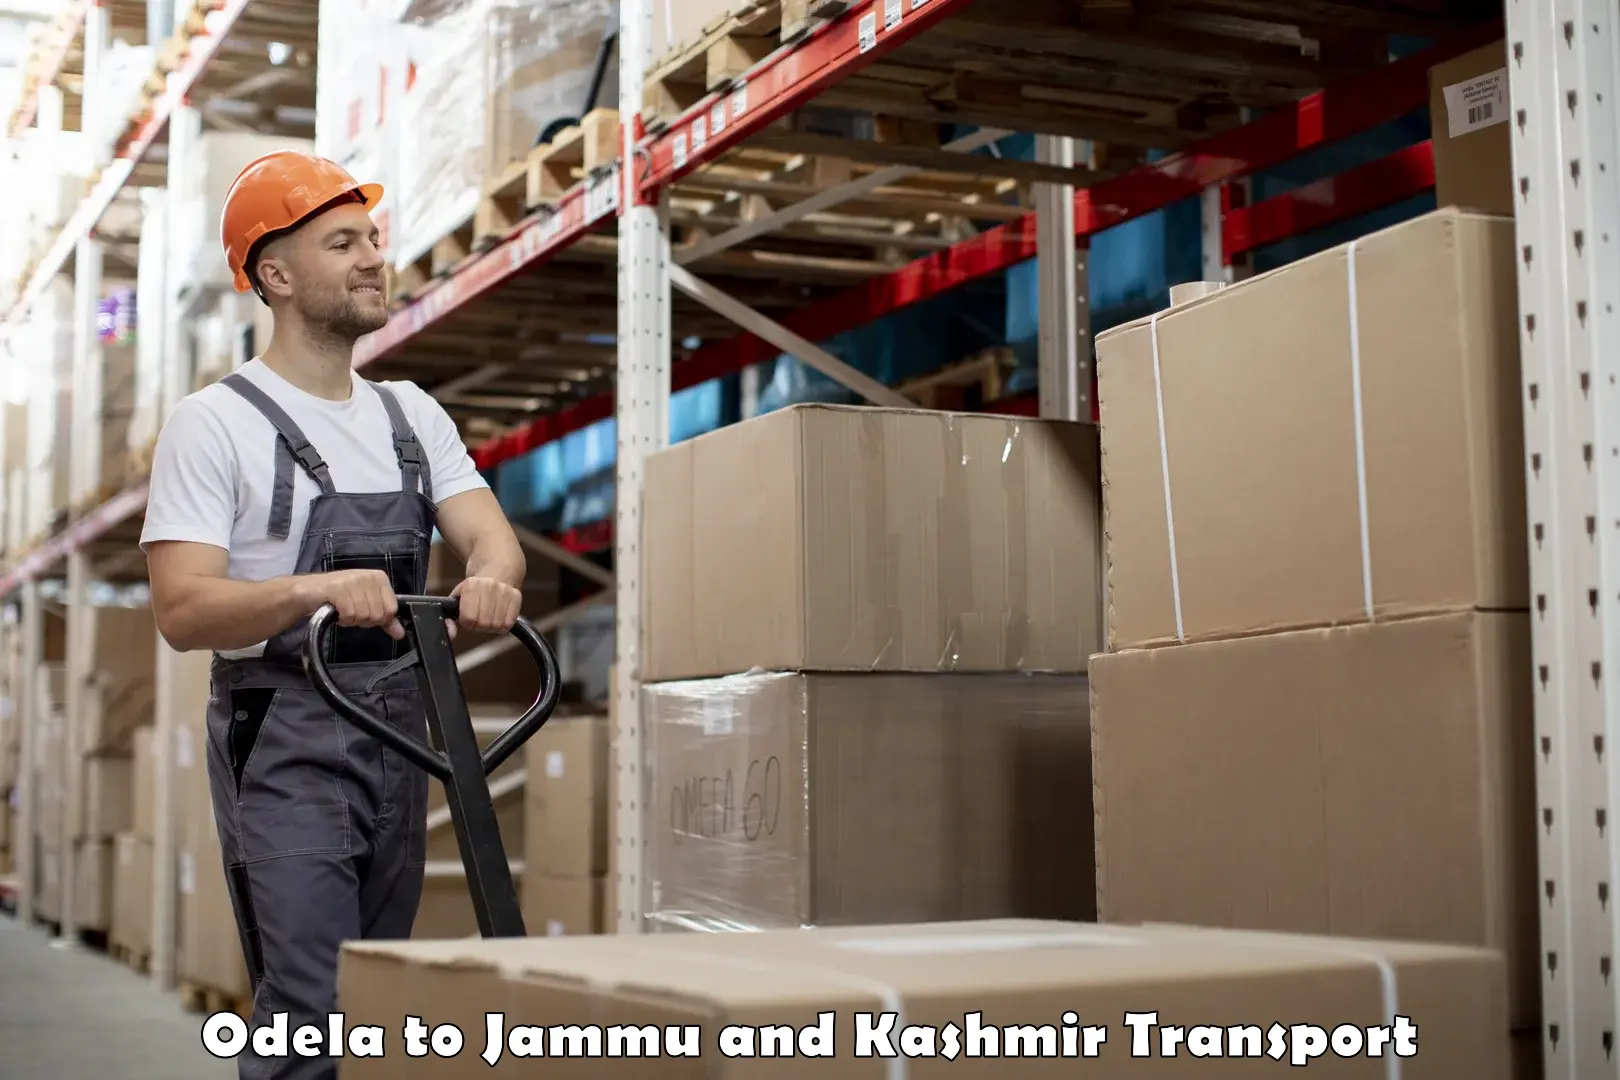 Container transport service Odela to Sopore